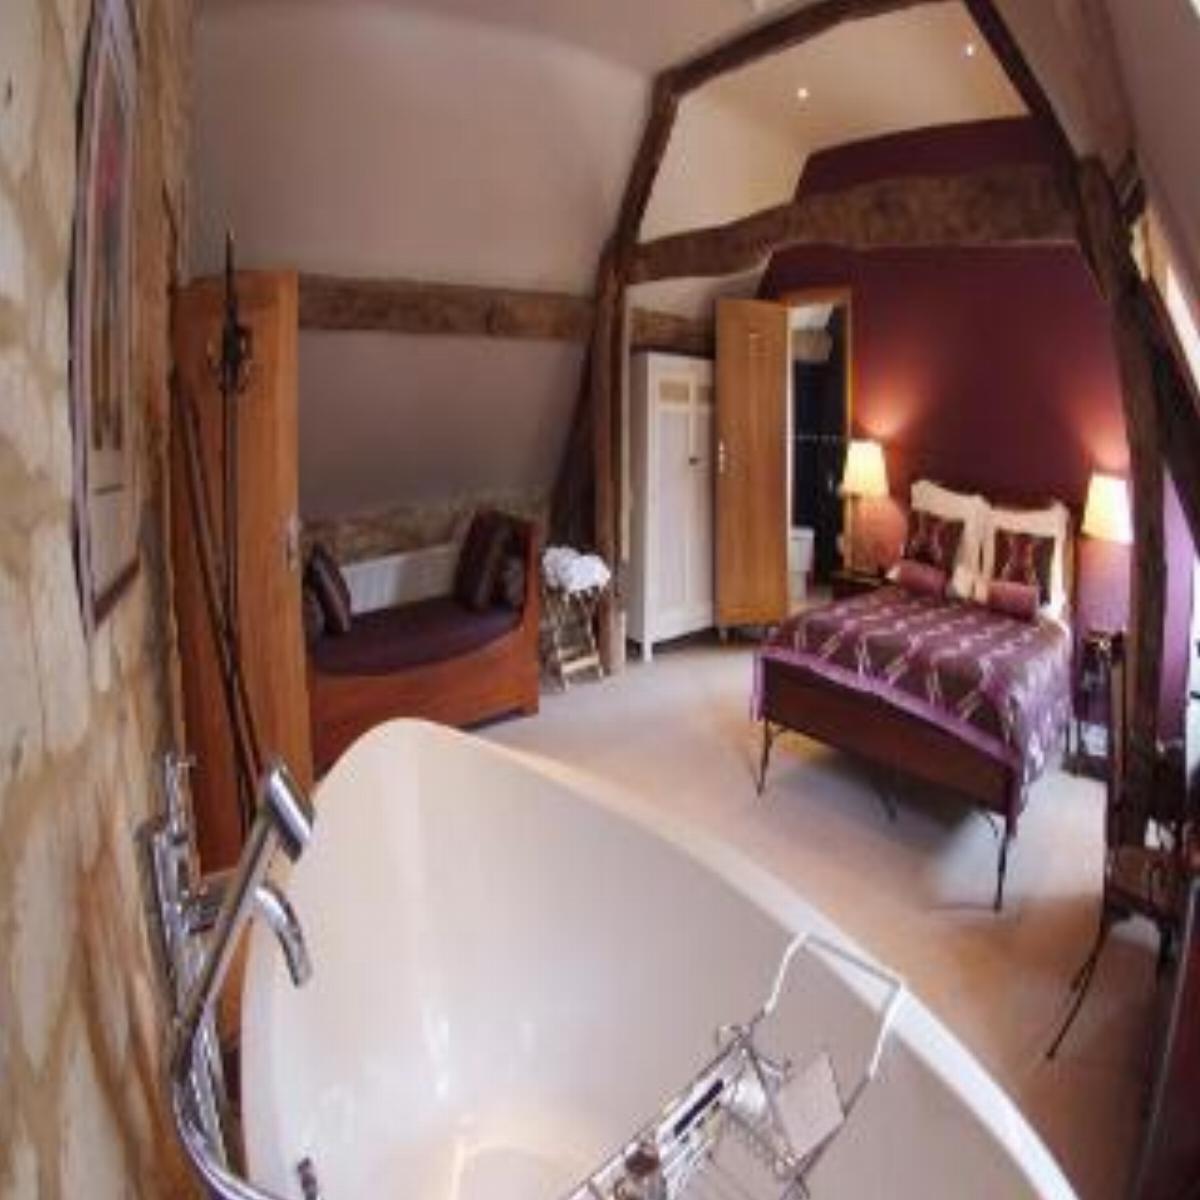 The Kings Hotel Hotel Chipping Campden United Kingdom